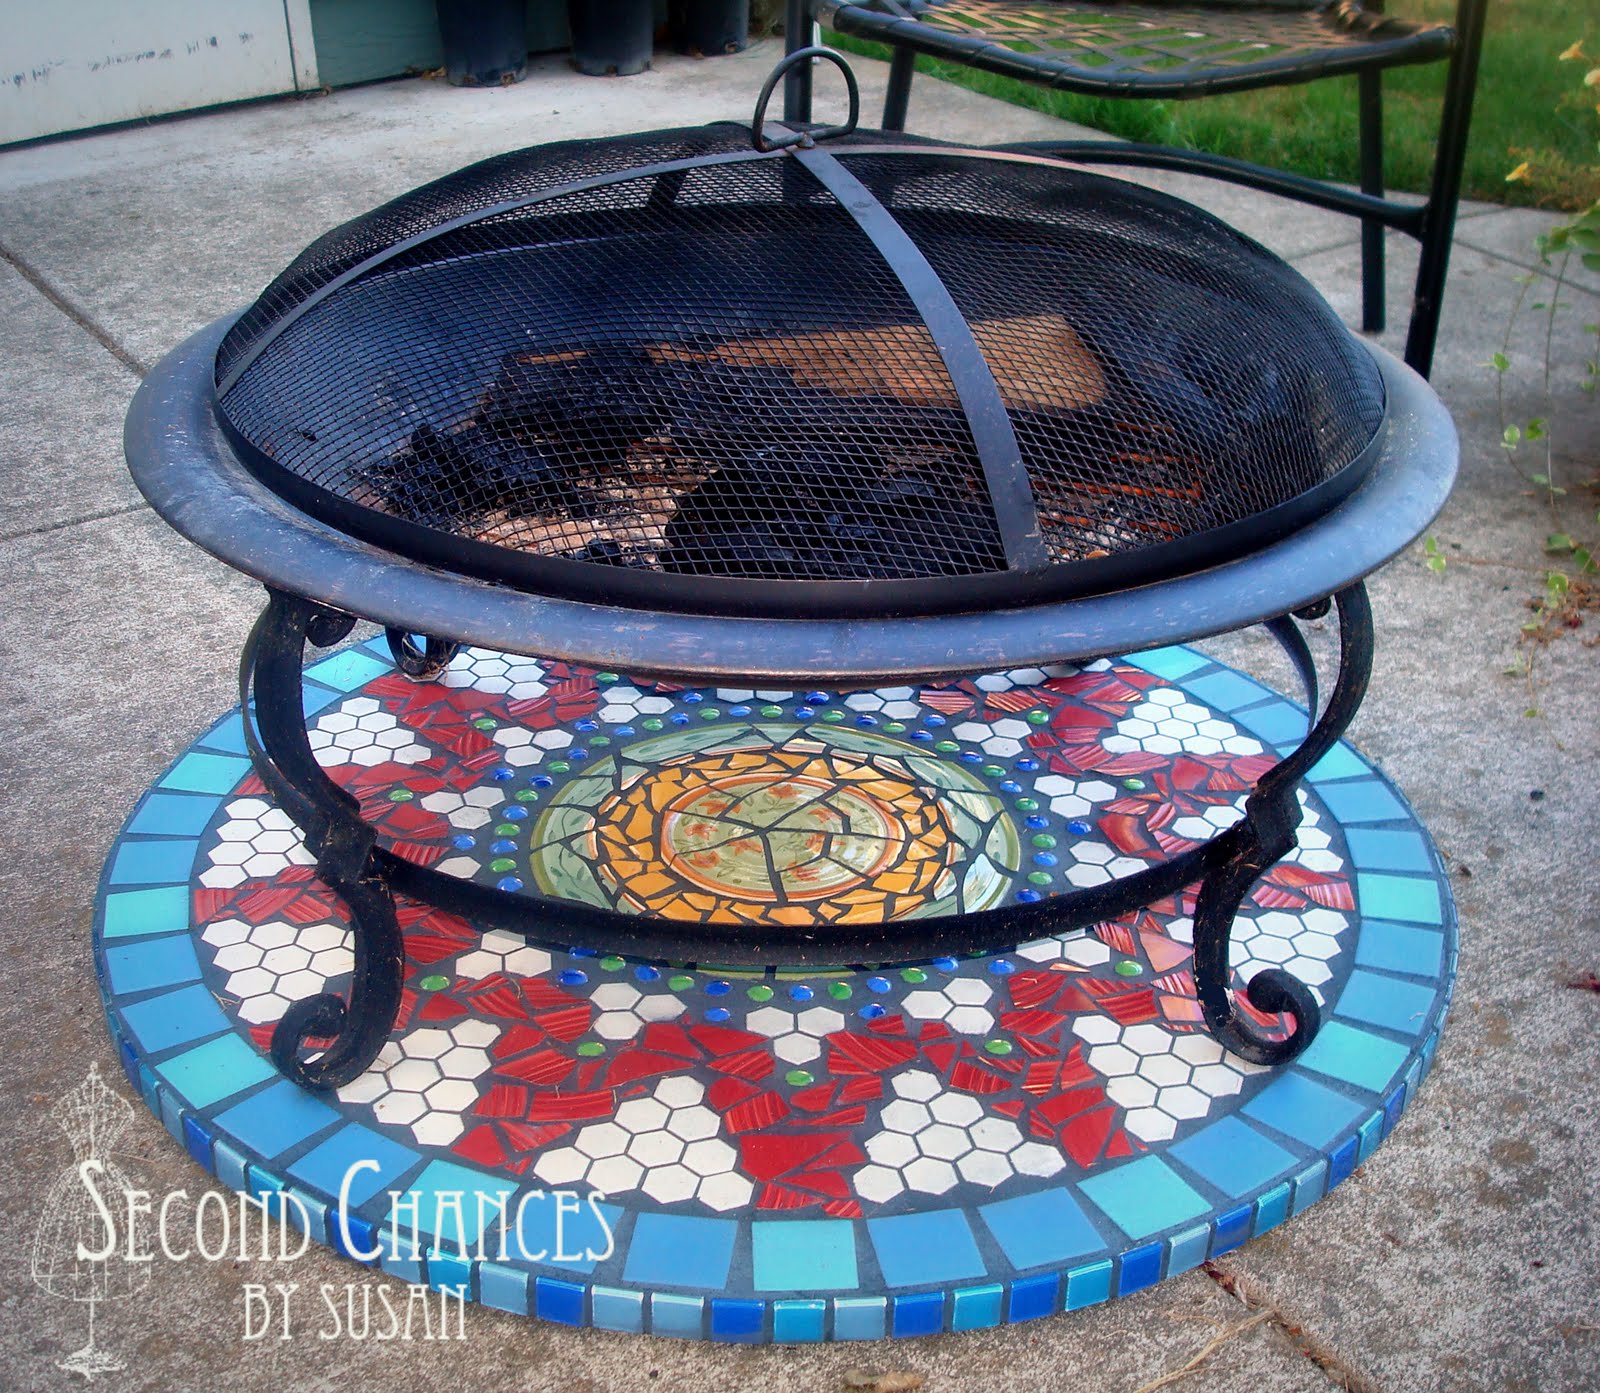 Second Chances By Susan Is That A Rug Under Your Fire Pit